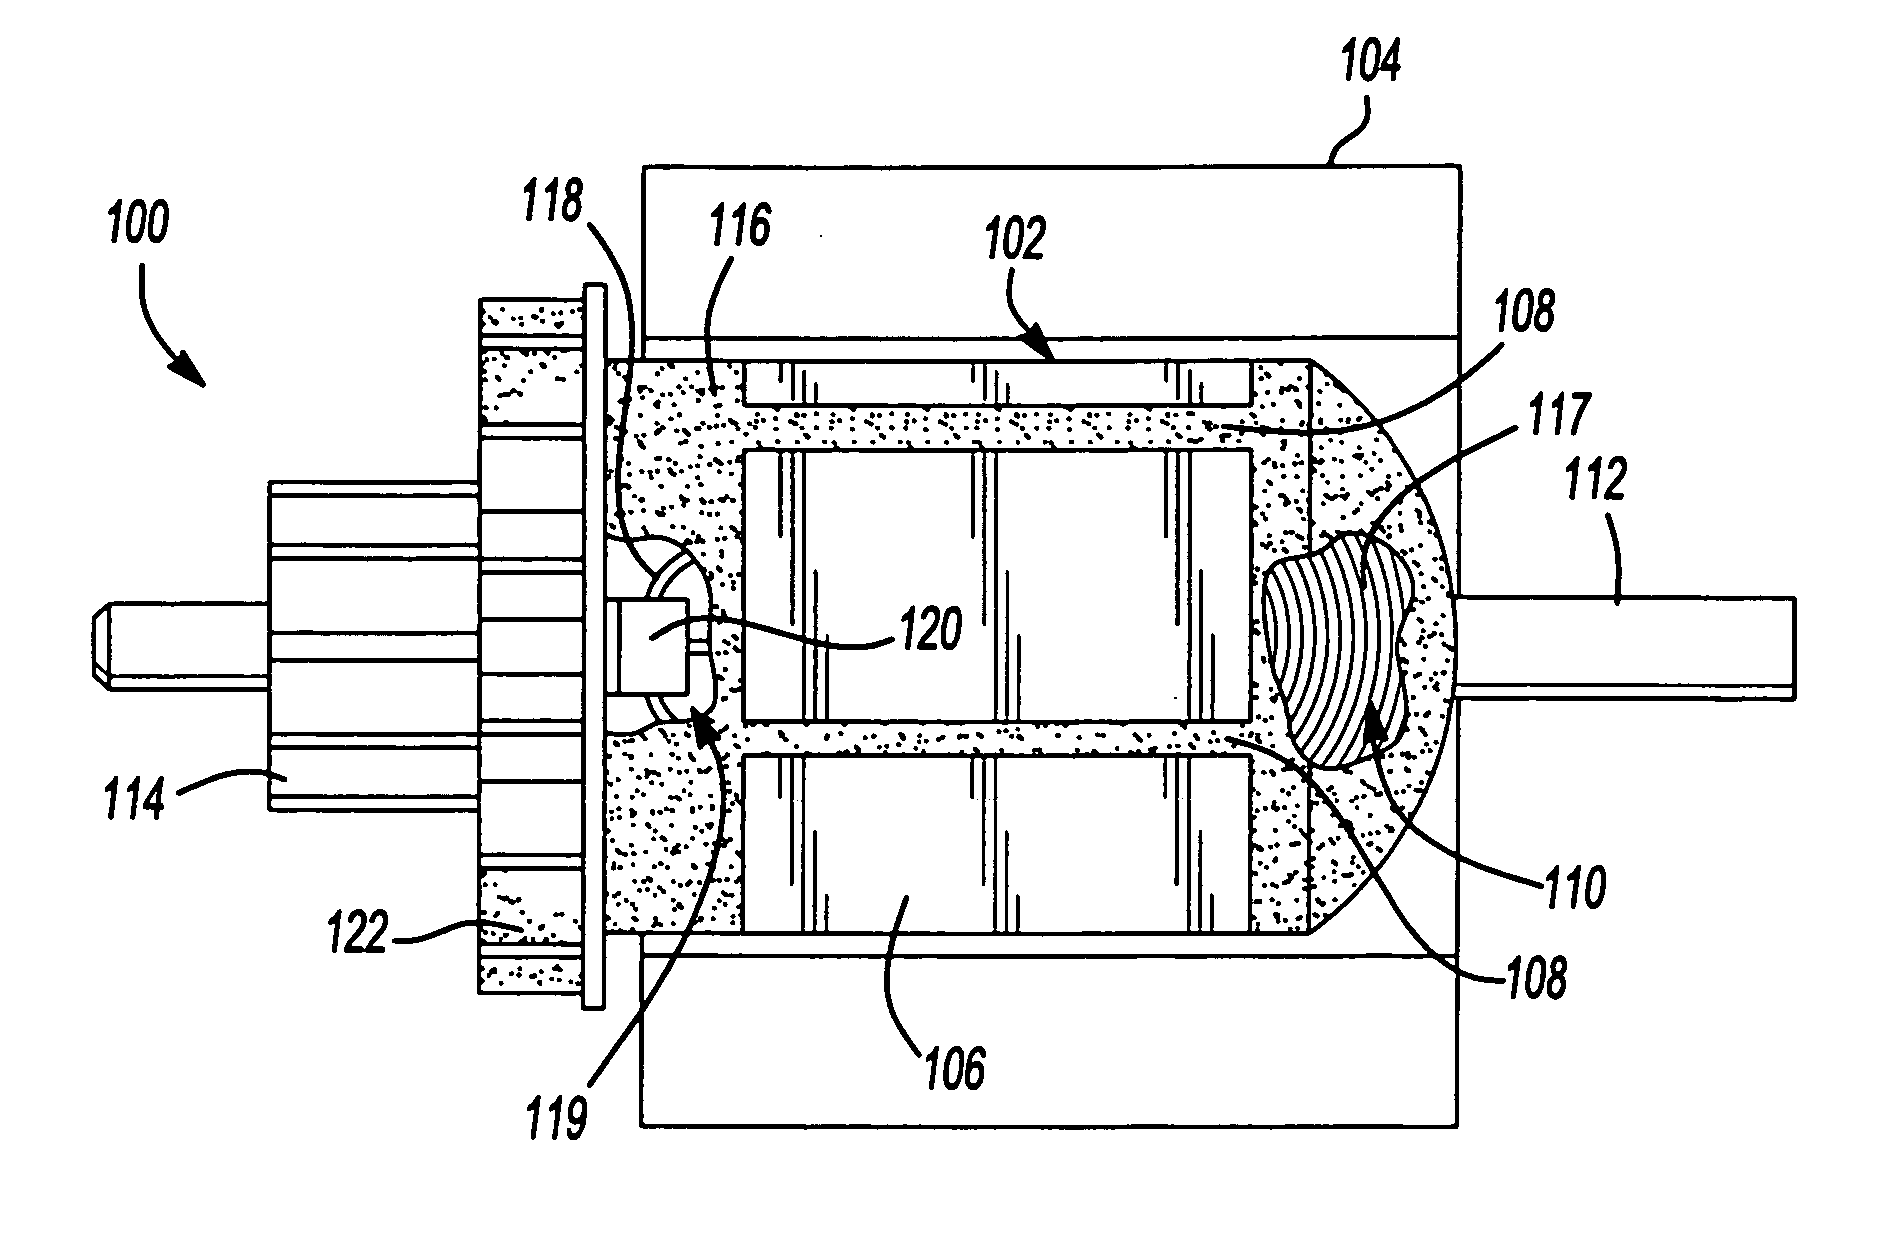 Electric motor and method of making same and method of making a power tool